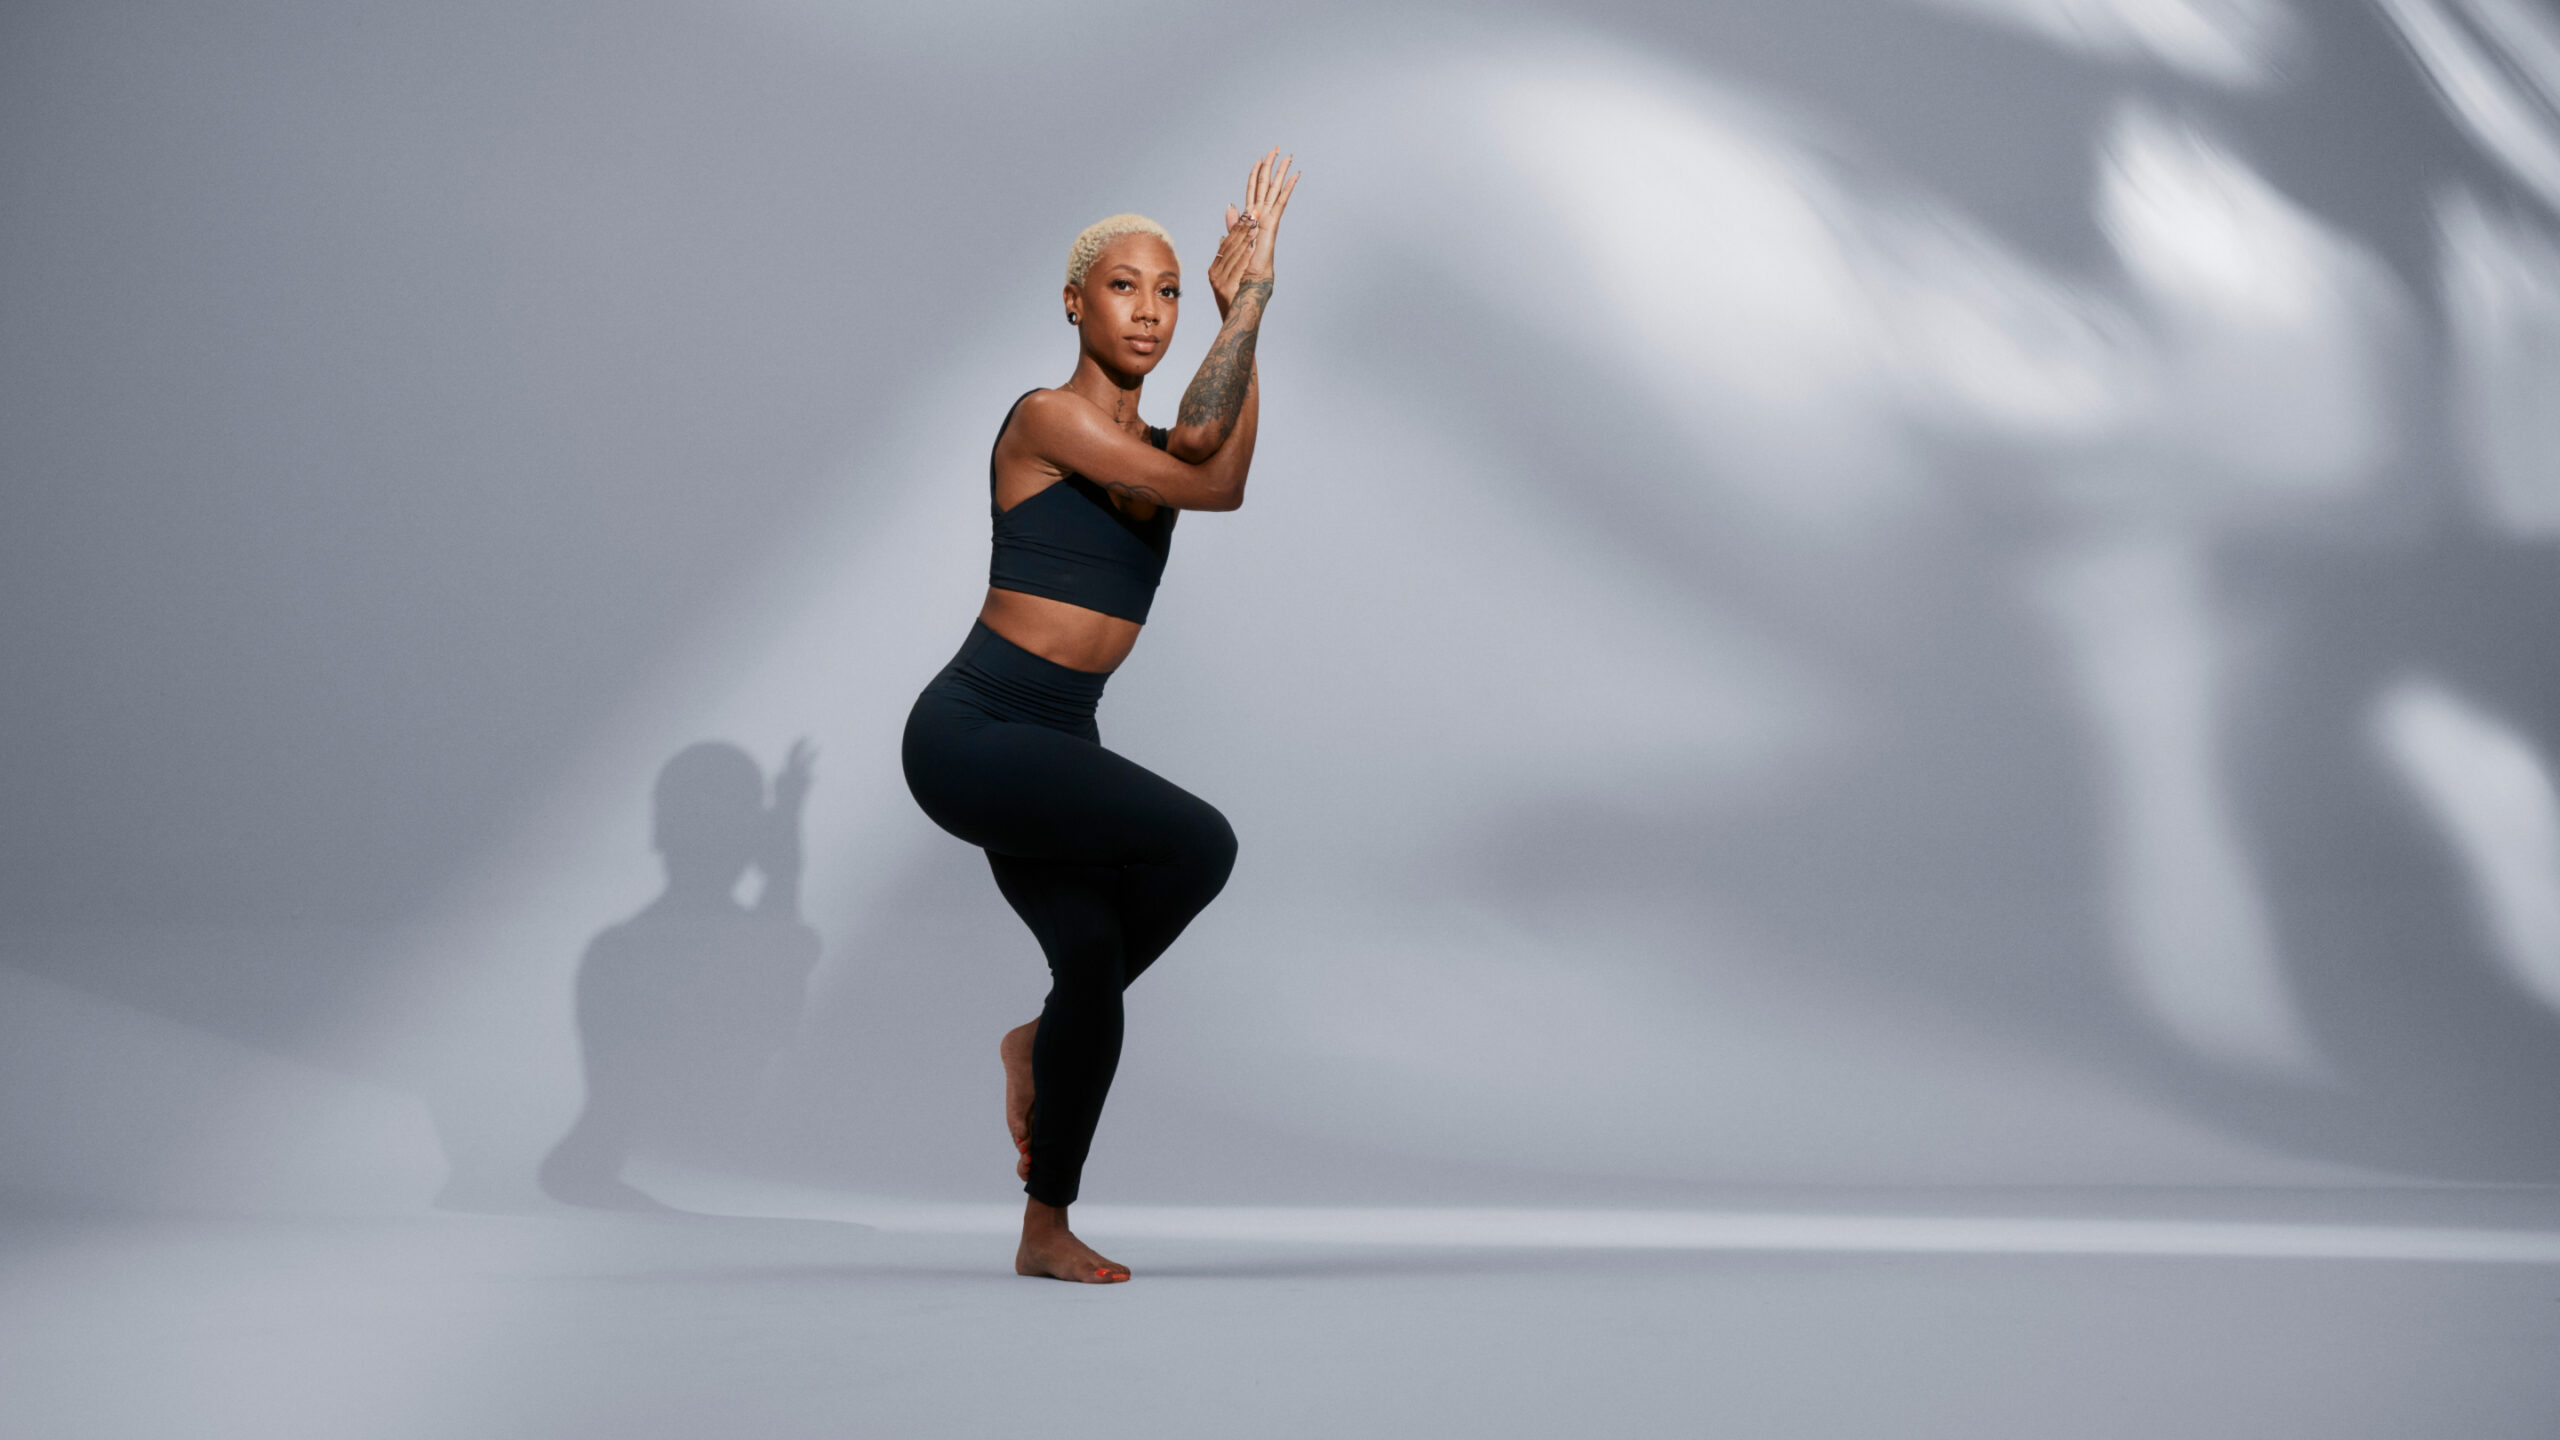 lululemon Studio Trainer poses in front of a grey background